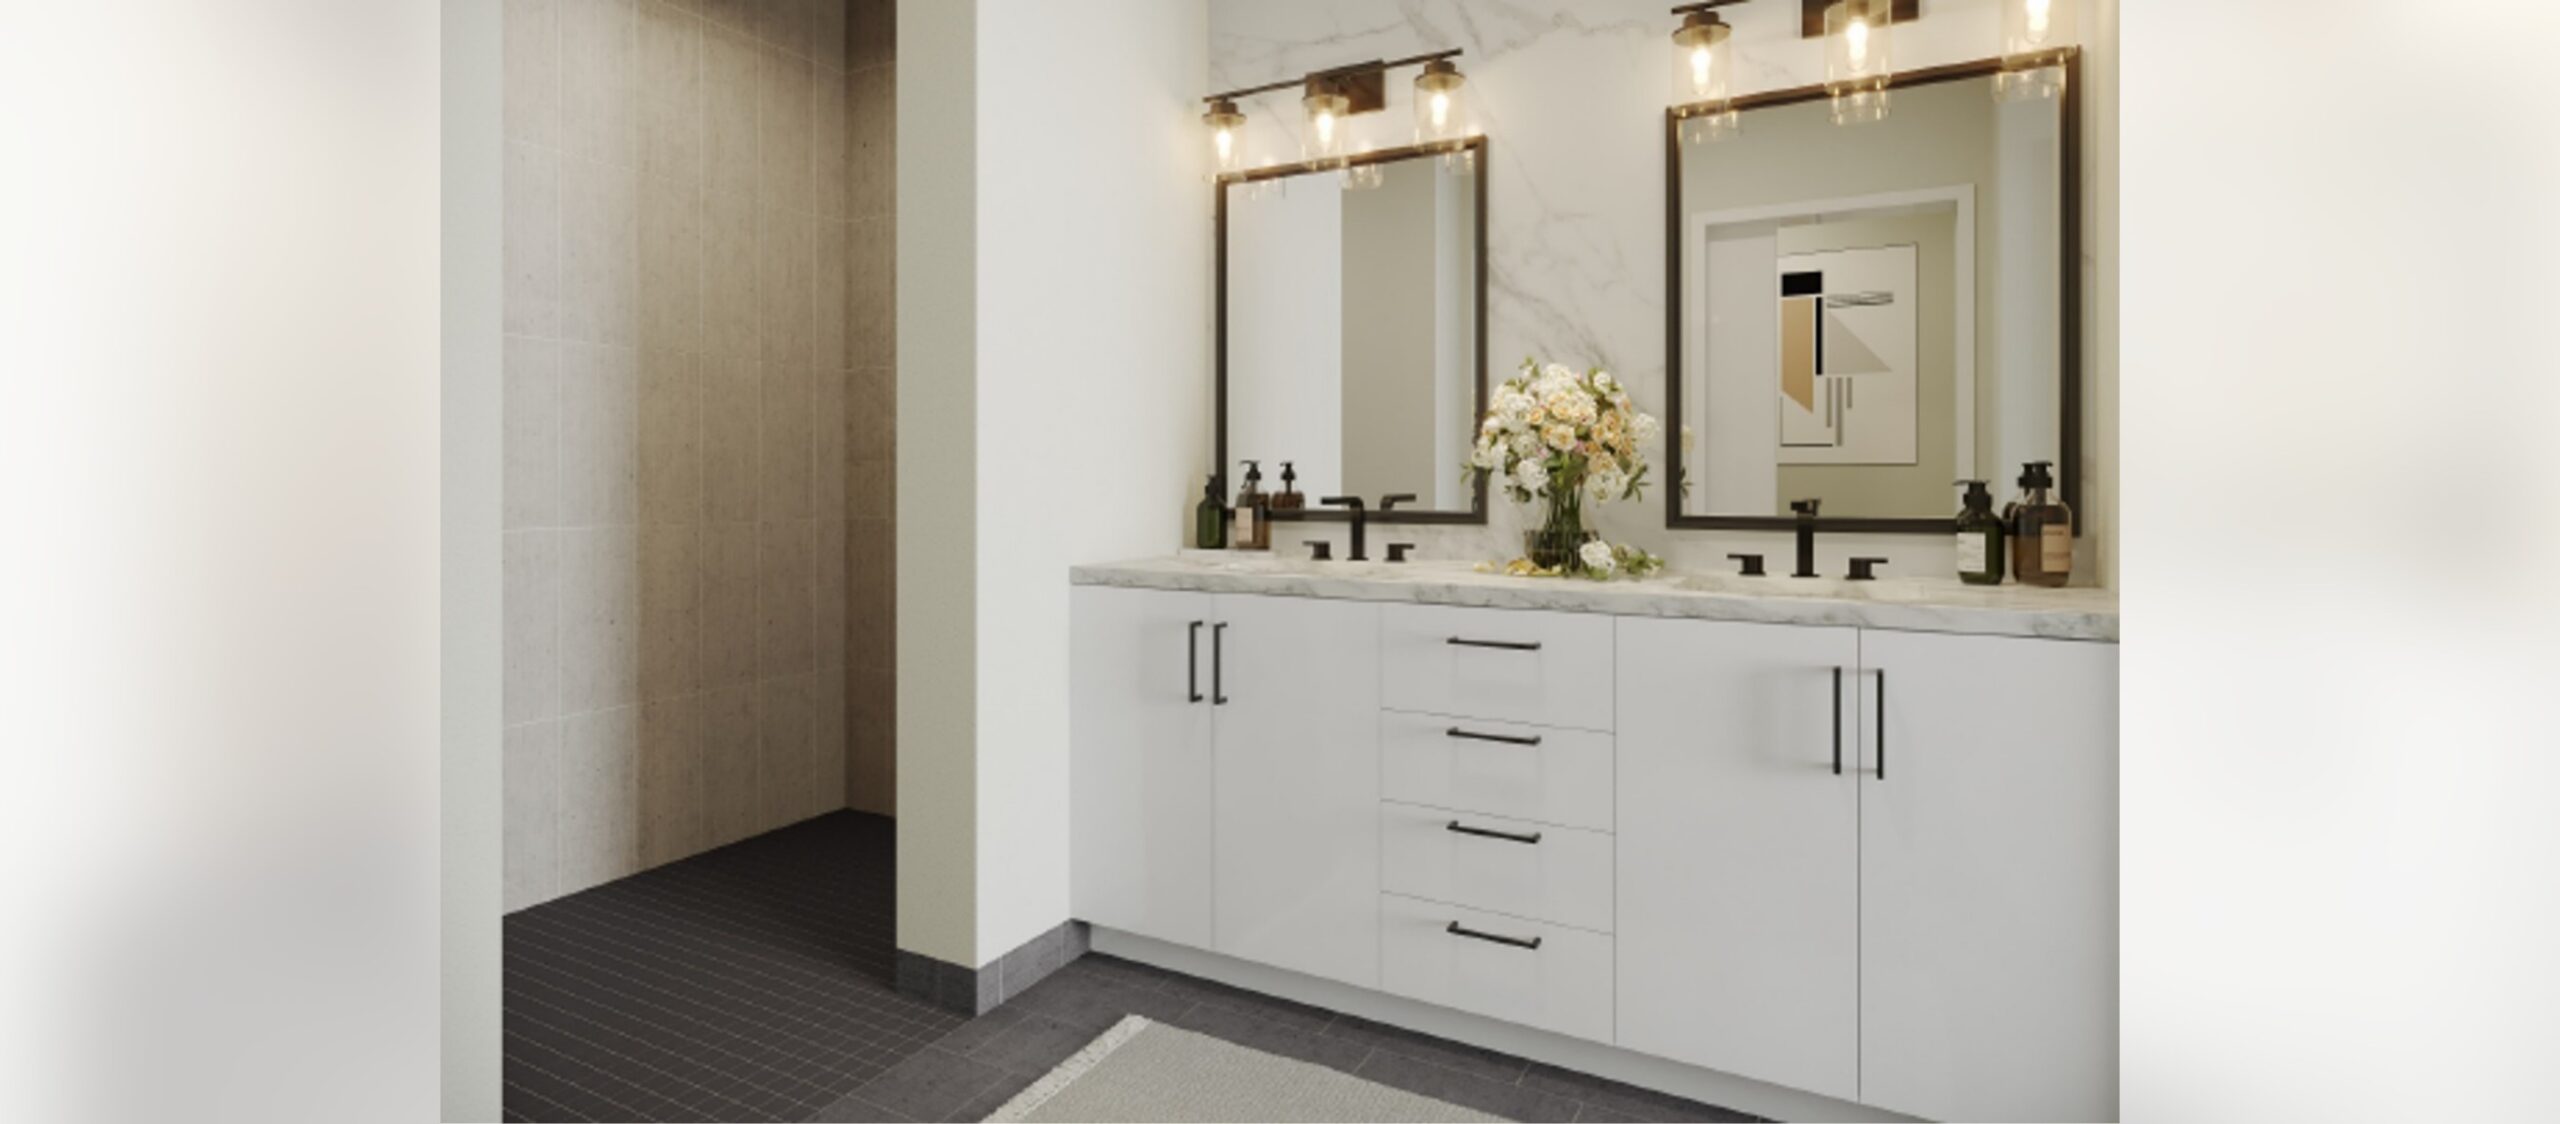 An independent living senior bathroom featuring white marble counter tops and mirrors.